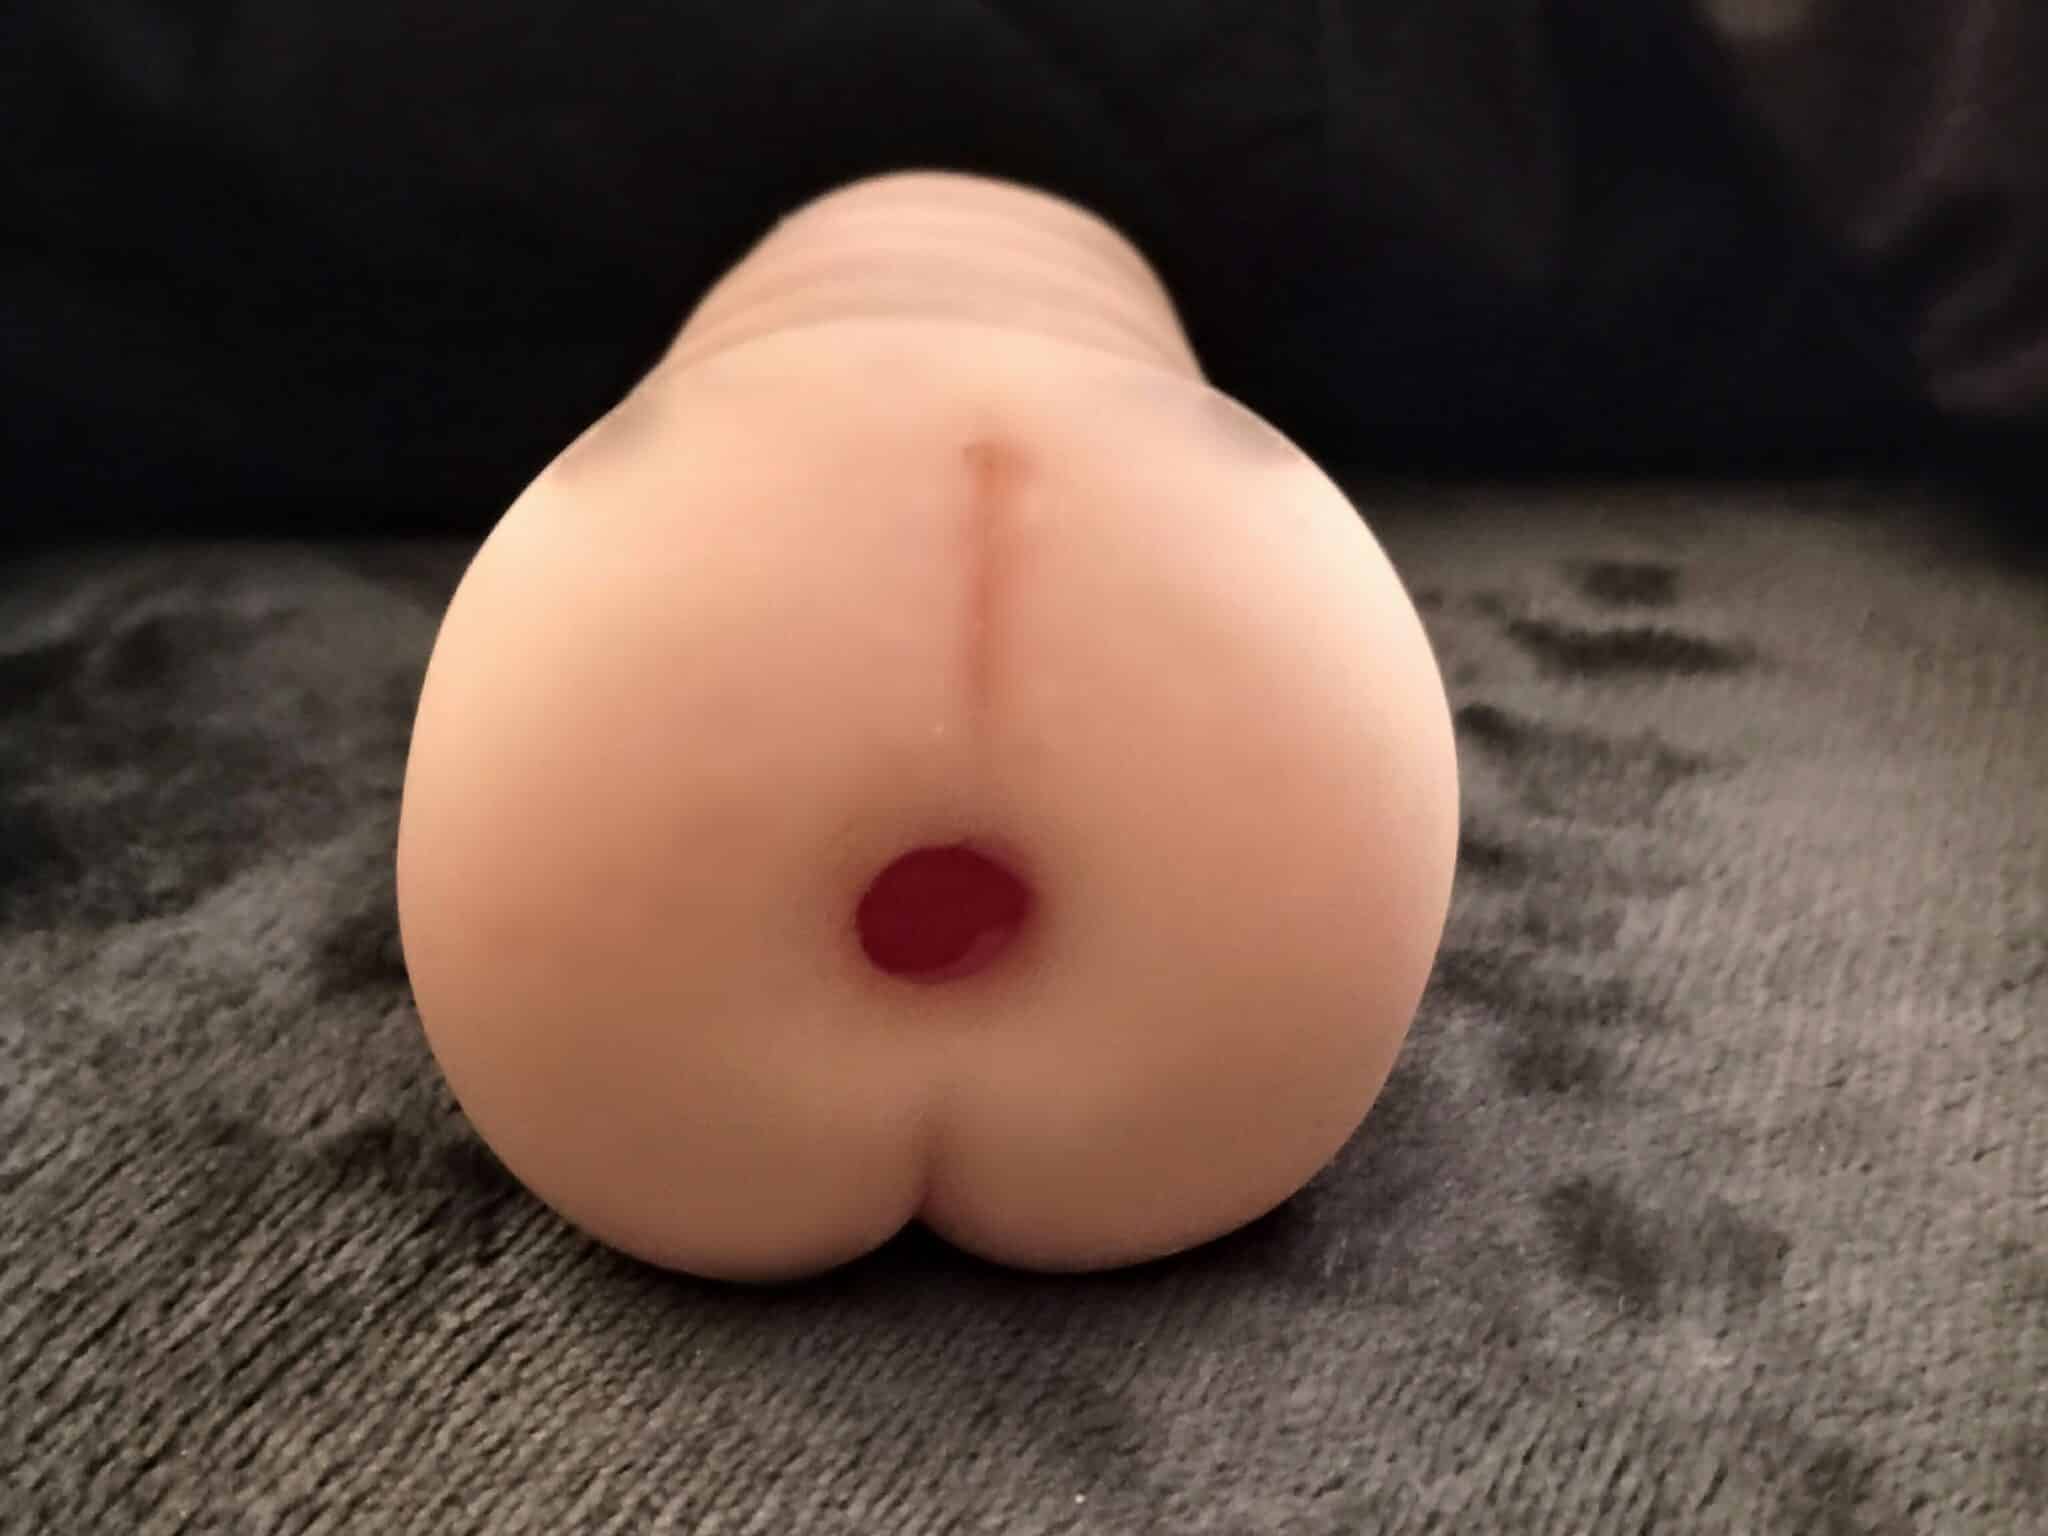 Peepshow Toys Ass Stroker The Intuitiveness of the Peepshow Toys Ass Stroker: A Review